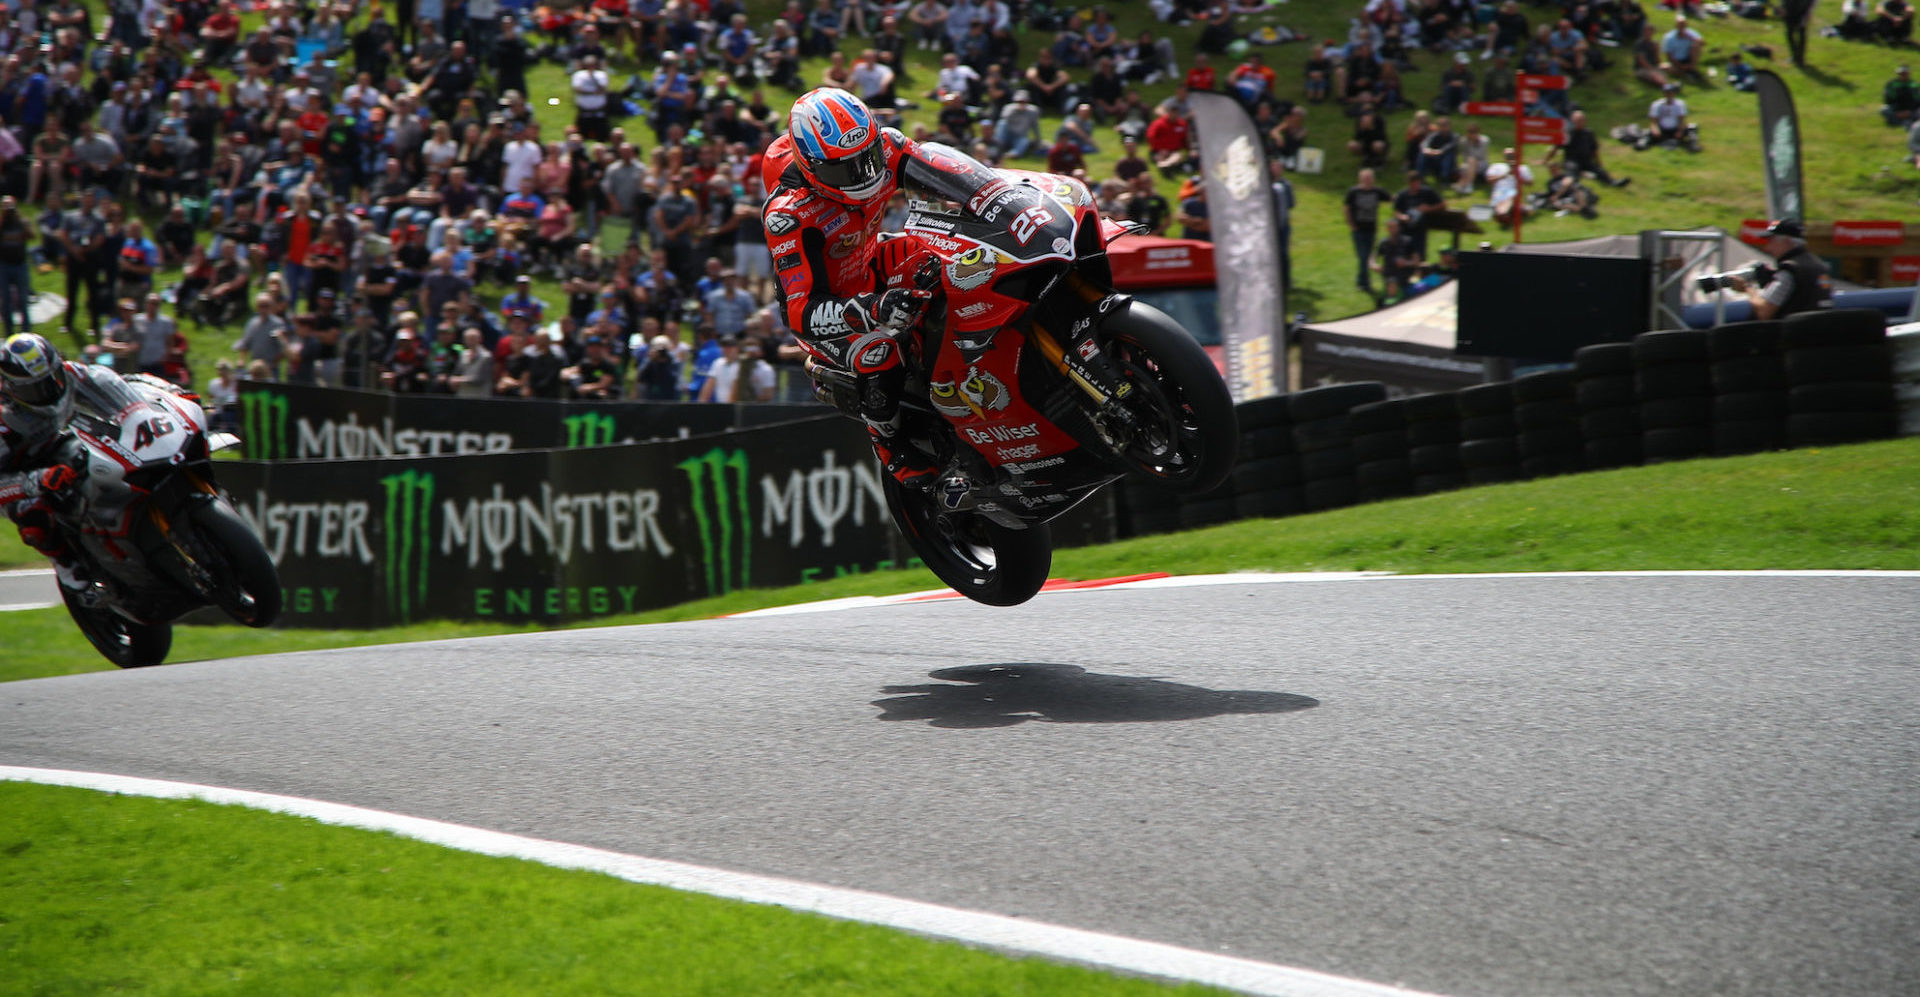 Josh Brookes (25) and Tommy Bridewell (46) going over 